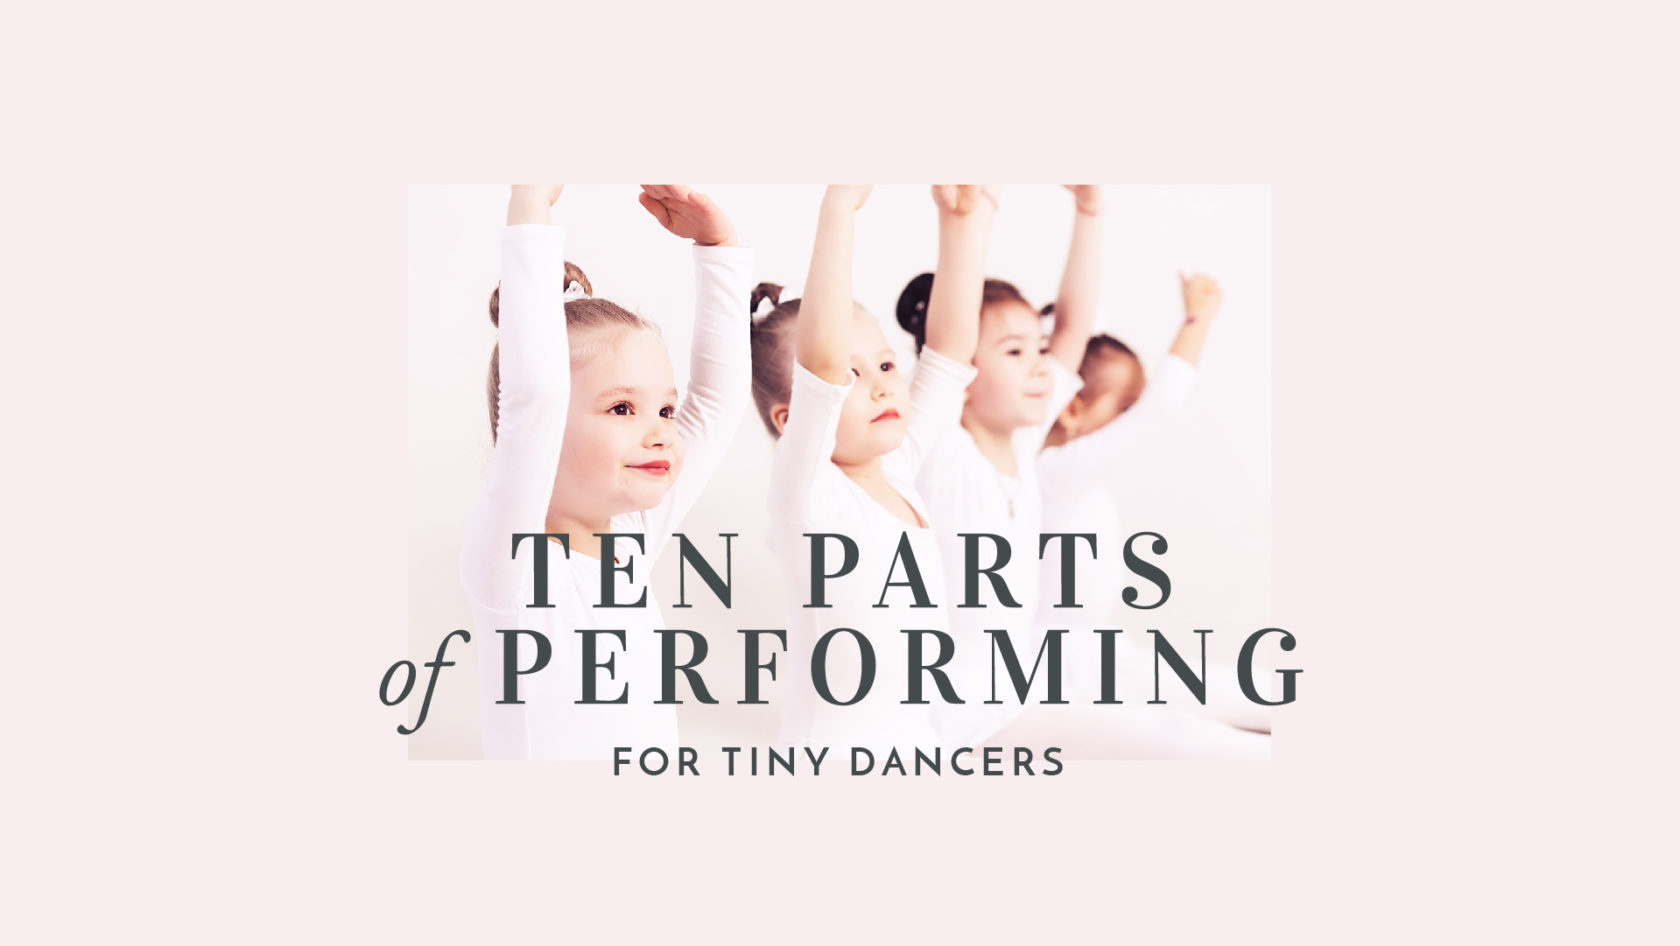 Ten Parts of Performing for Little Dancers